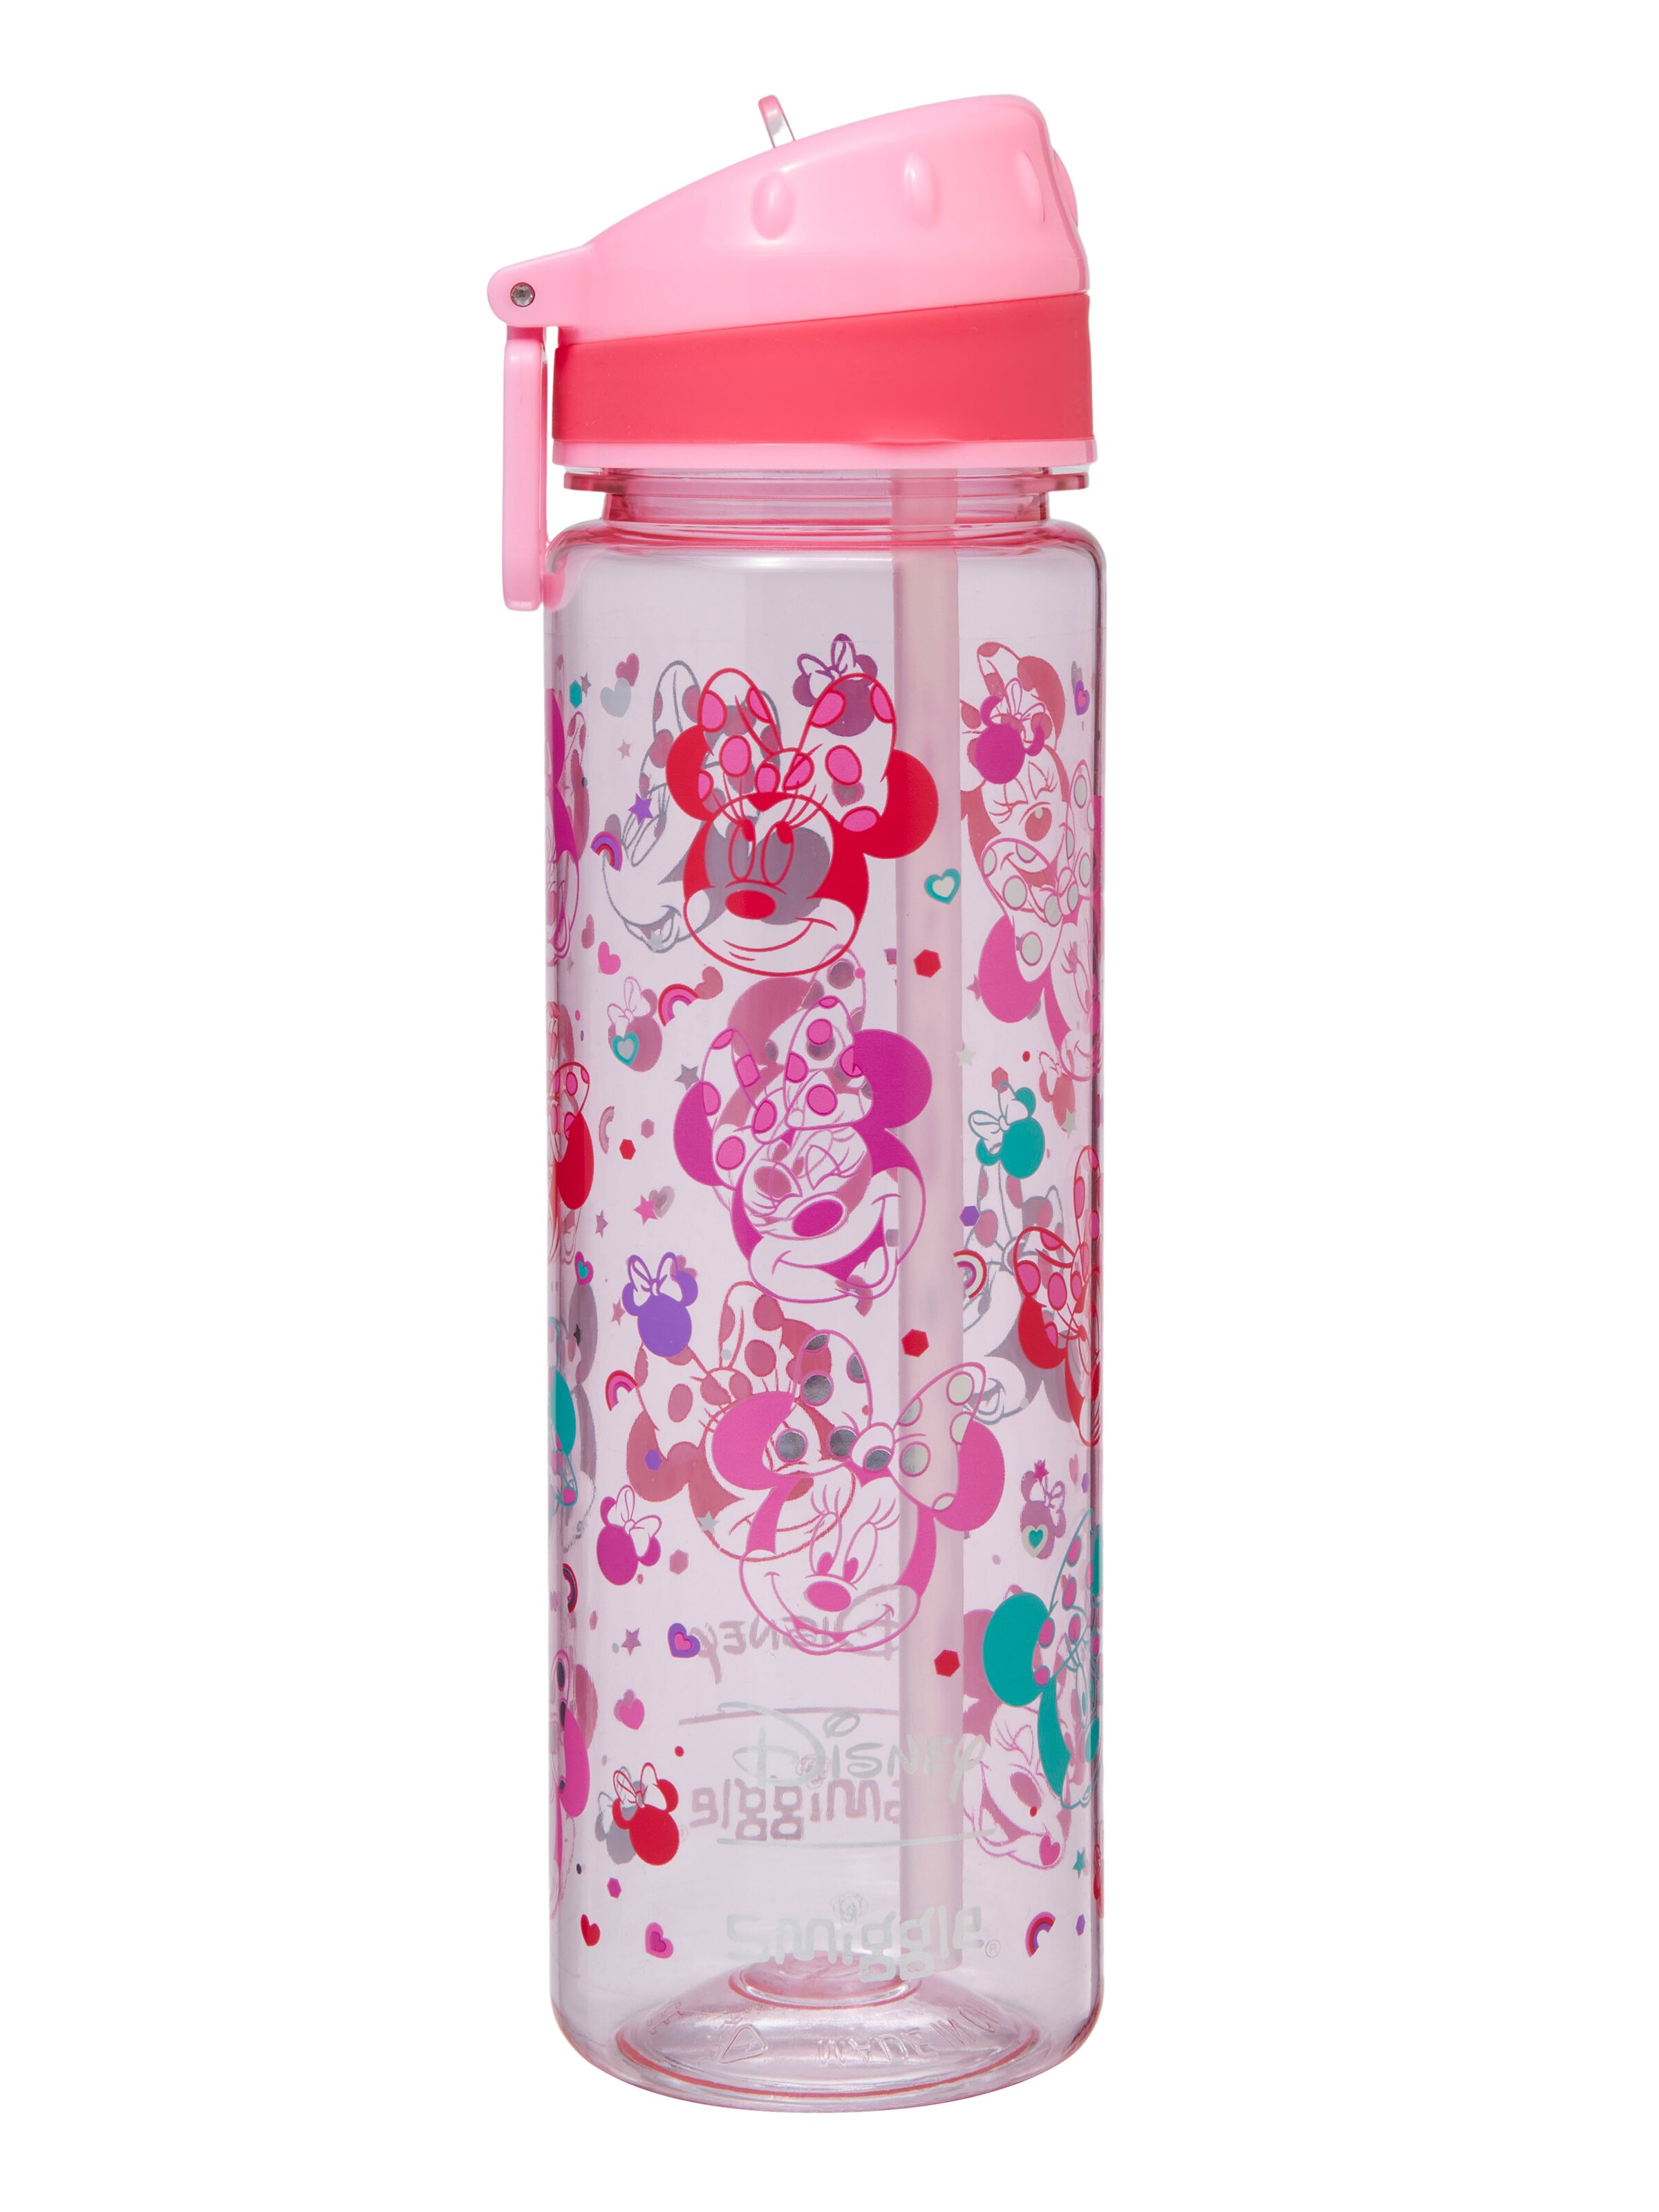 https://www.smiggle.sg/SM/aurora/images/products/large/449952_confetti_l.jpg?i10c=img.resize(width:1280)